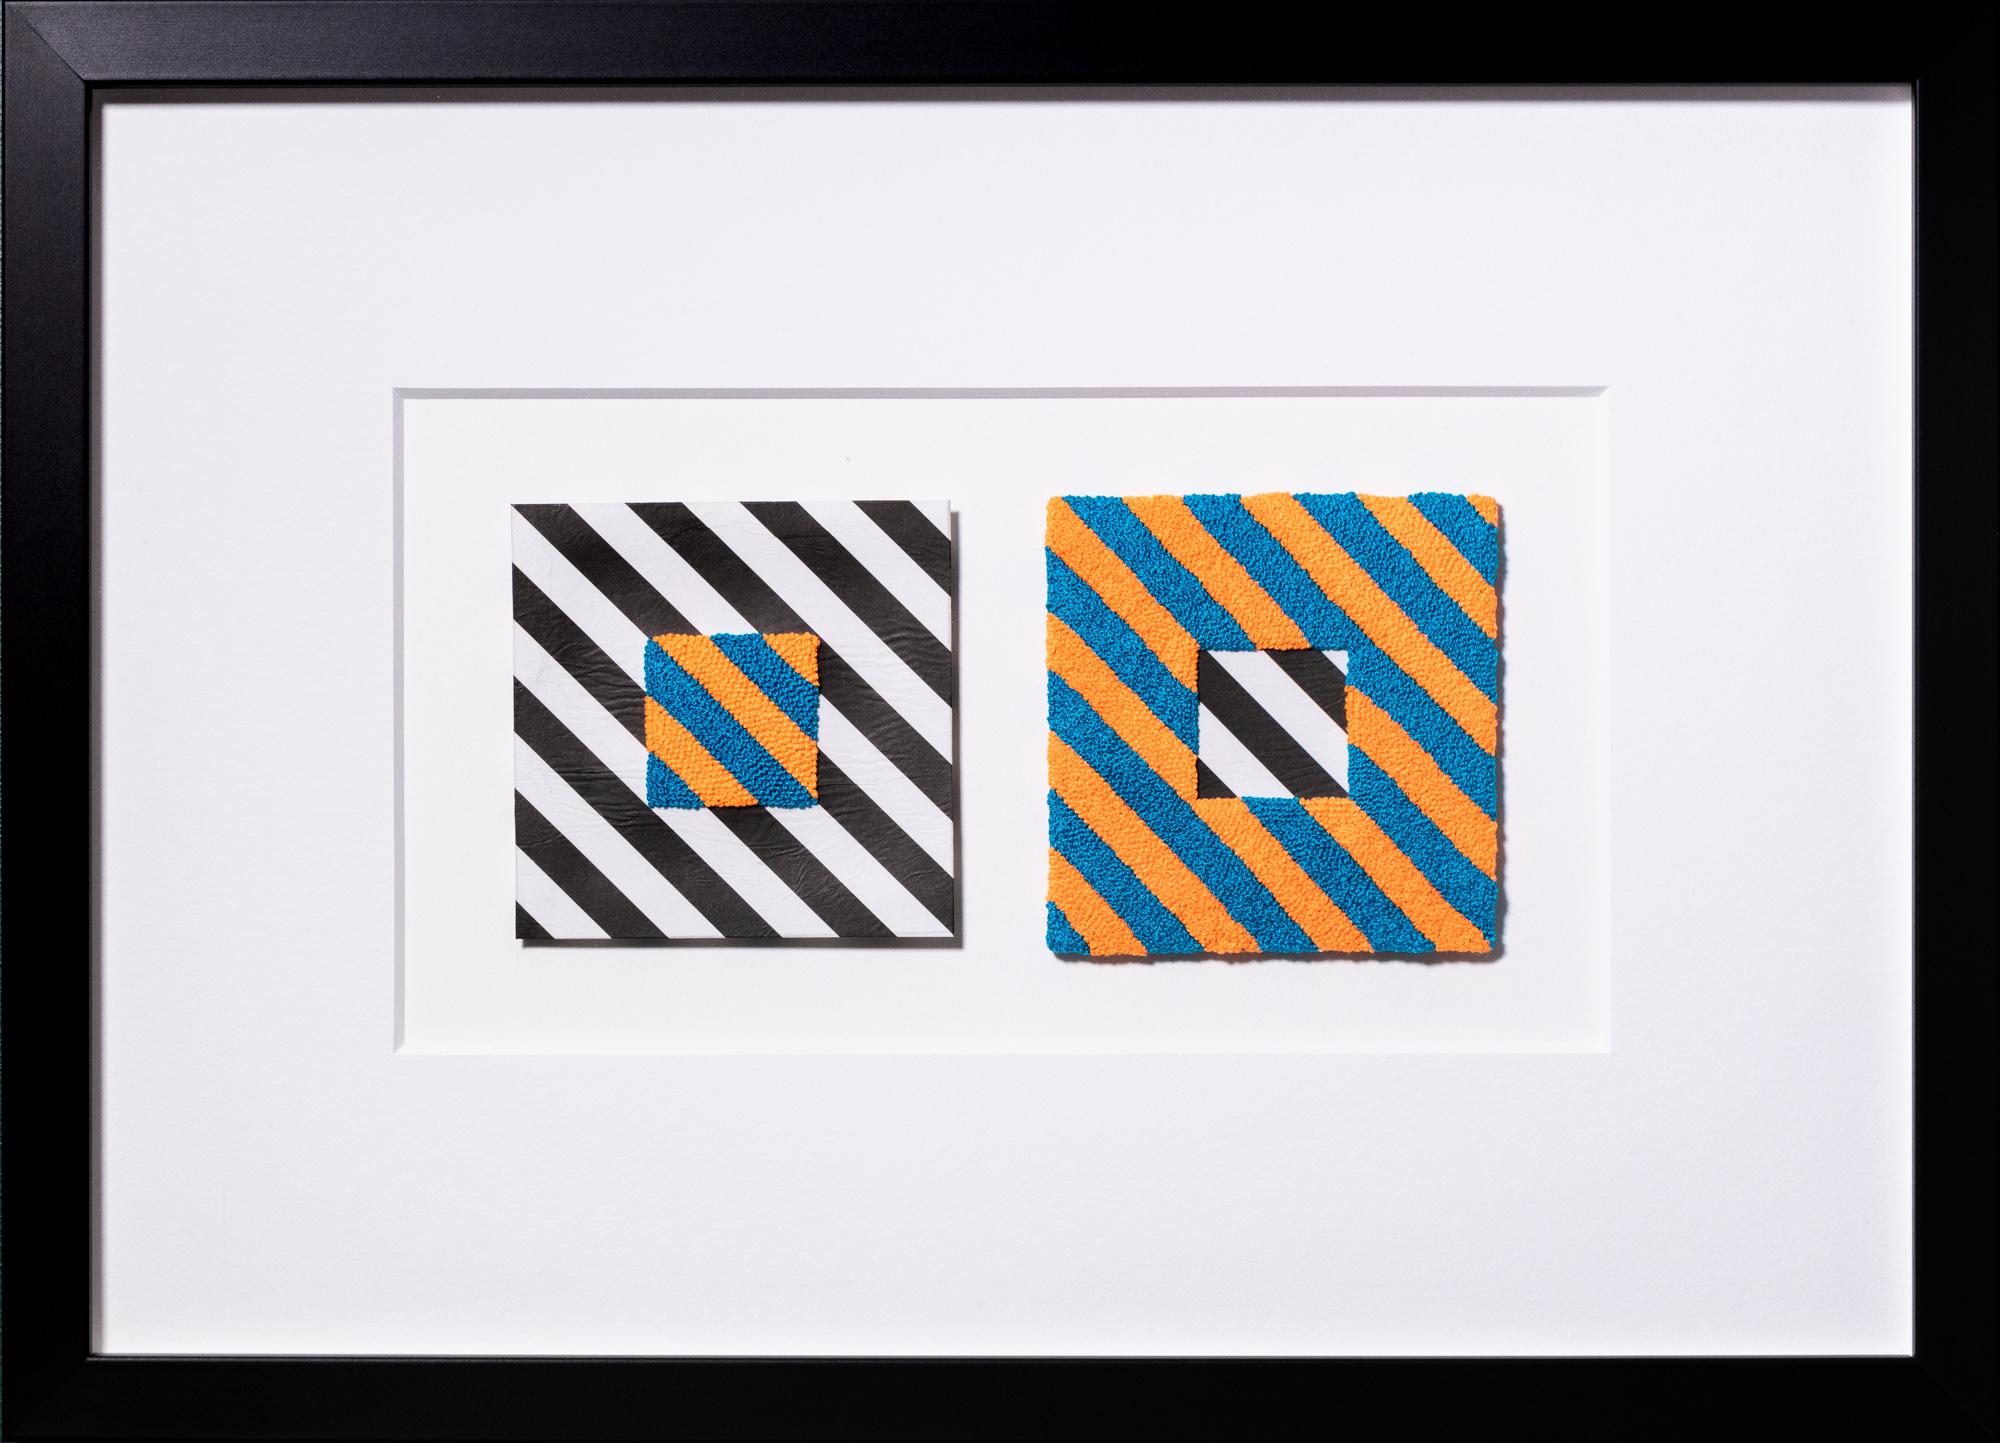 "Complete Me: Stripes" paper collage, hand-embroidery, geometric, blue, yellow